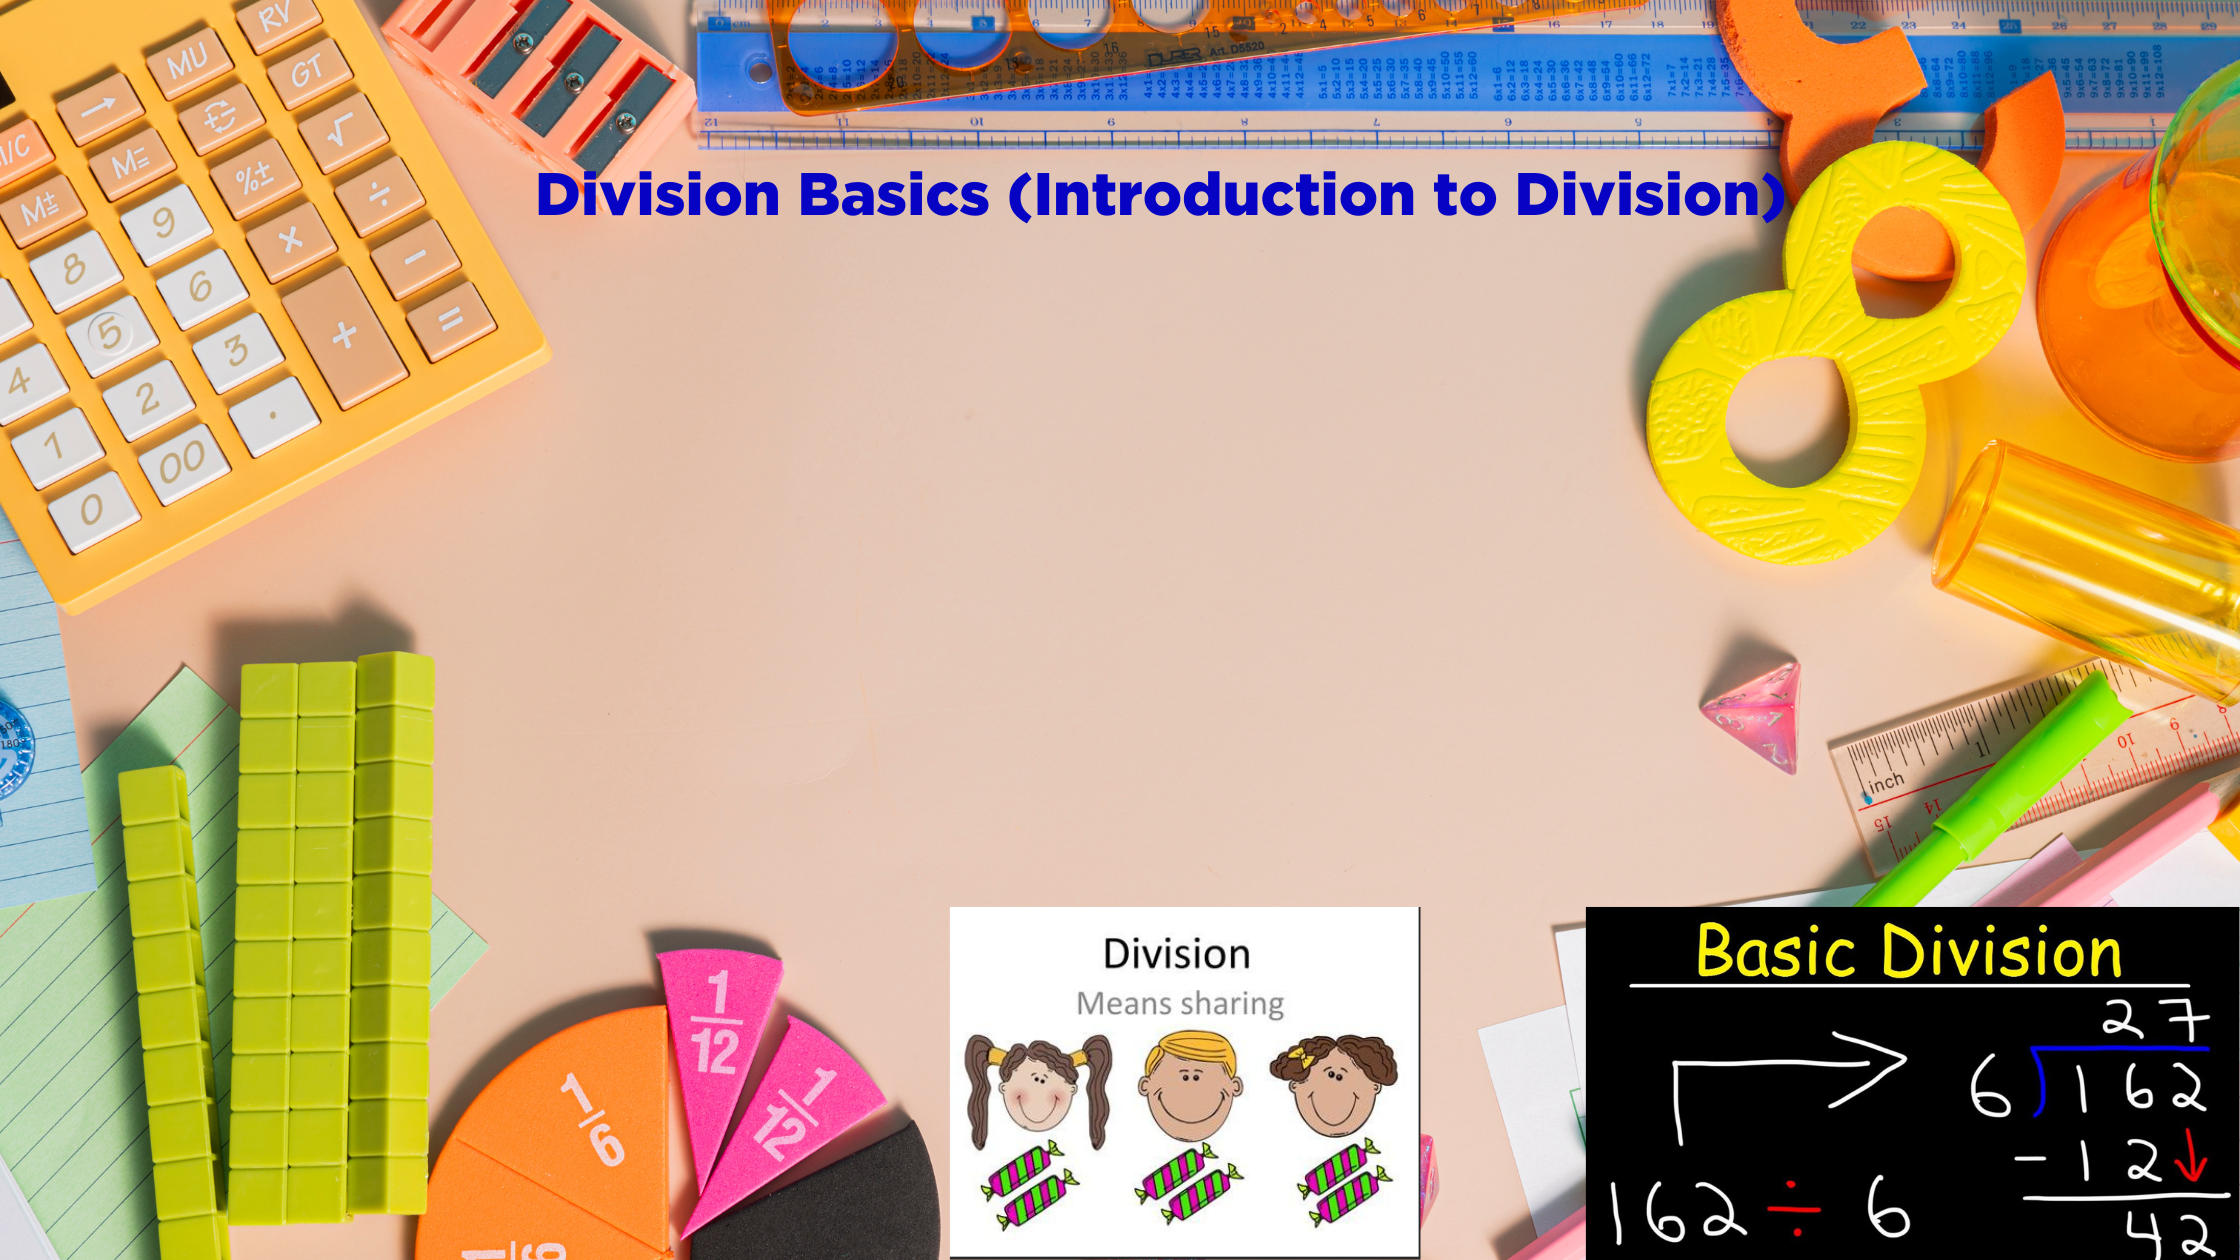 Division Basics (Introduction to Division)